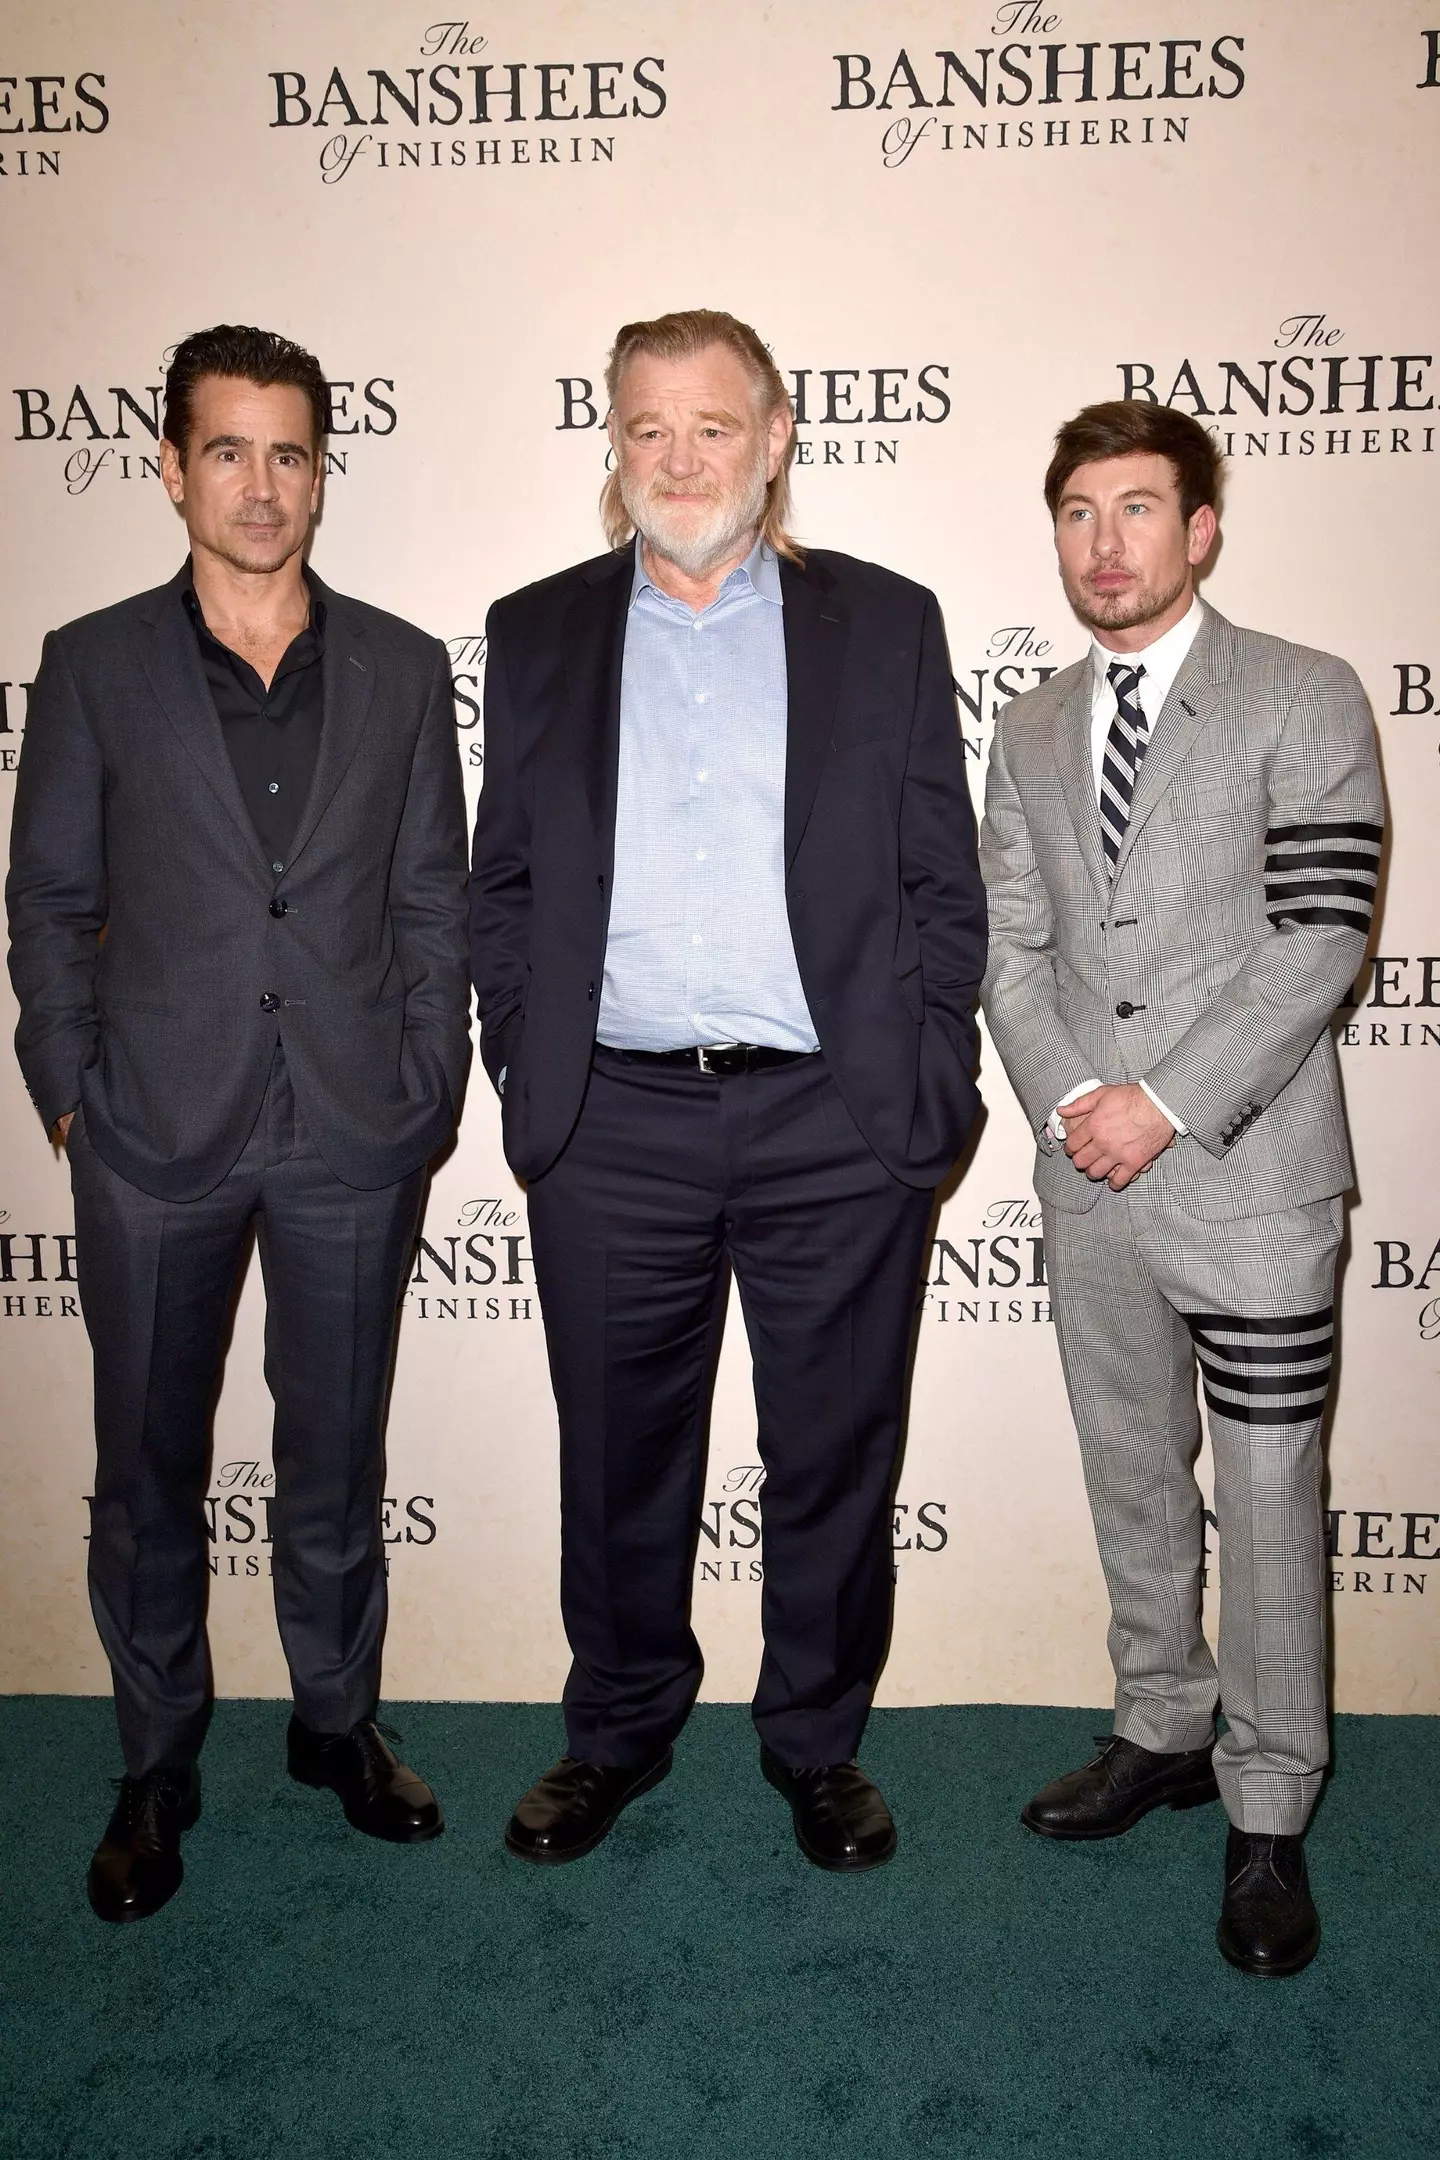 Barry Keoghan was nominated for his first Oscar The Banshees of Inisherin, which features Colin Farrell and Brendan Gleeson.